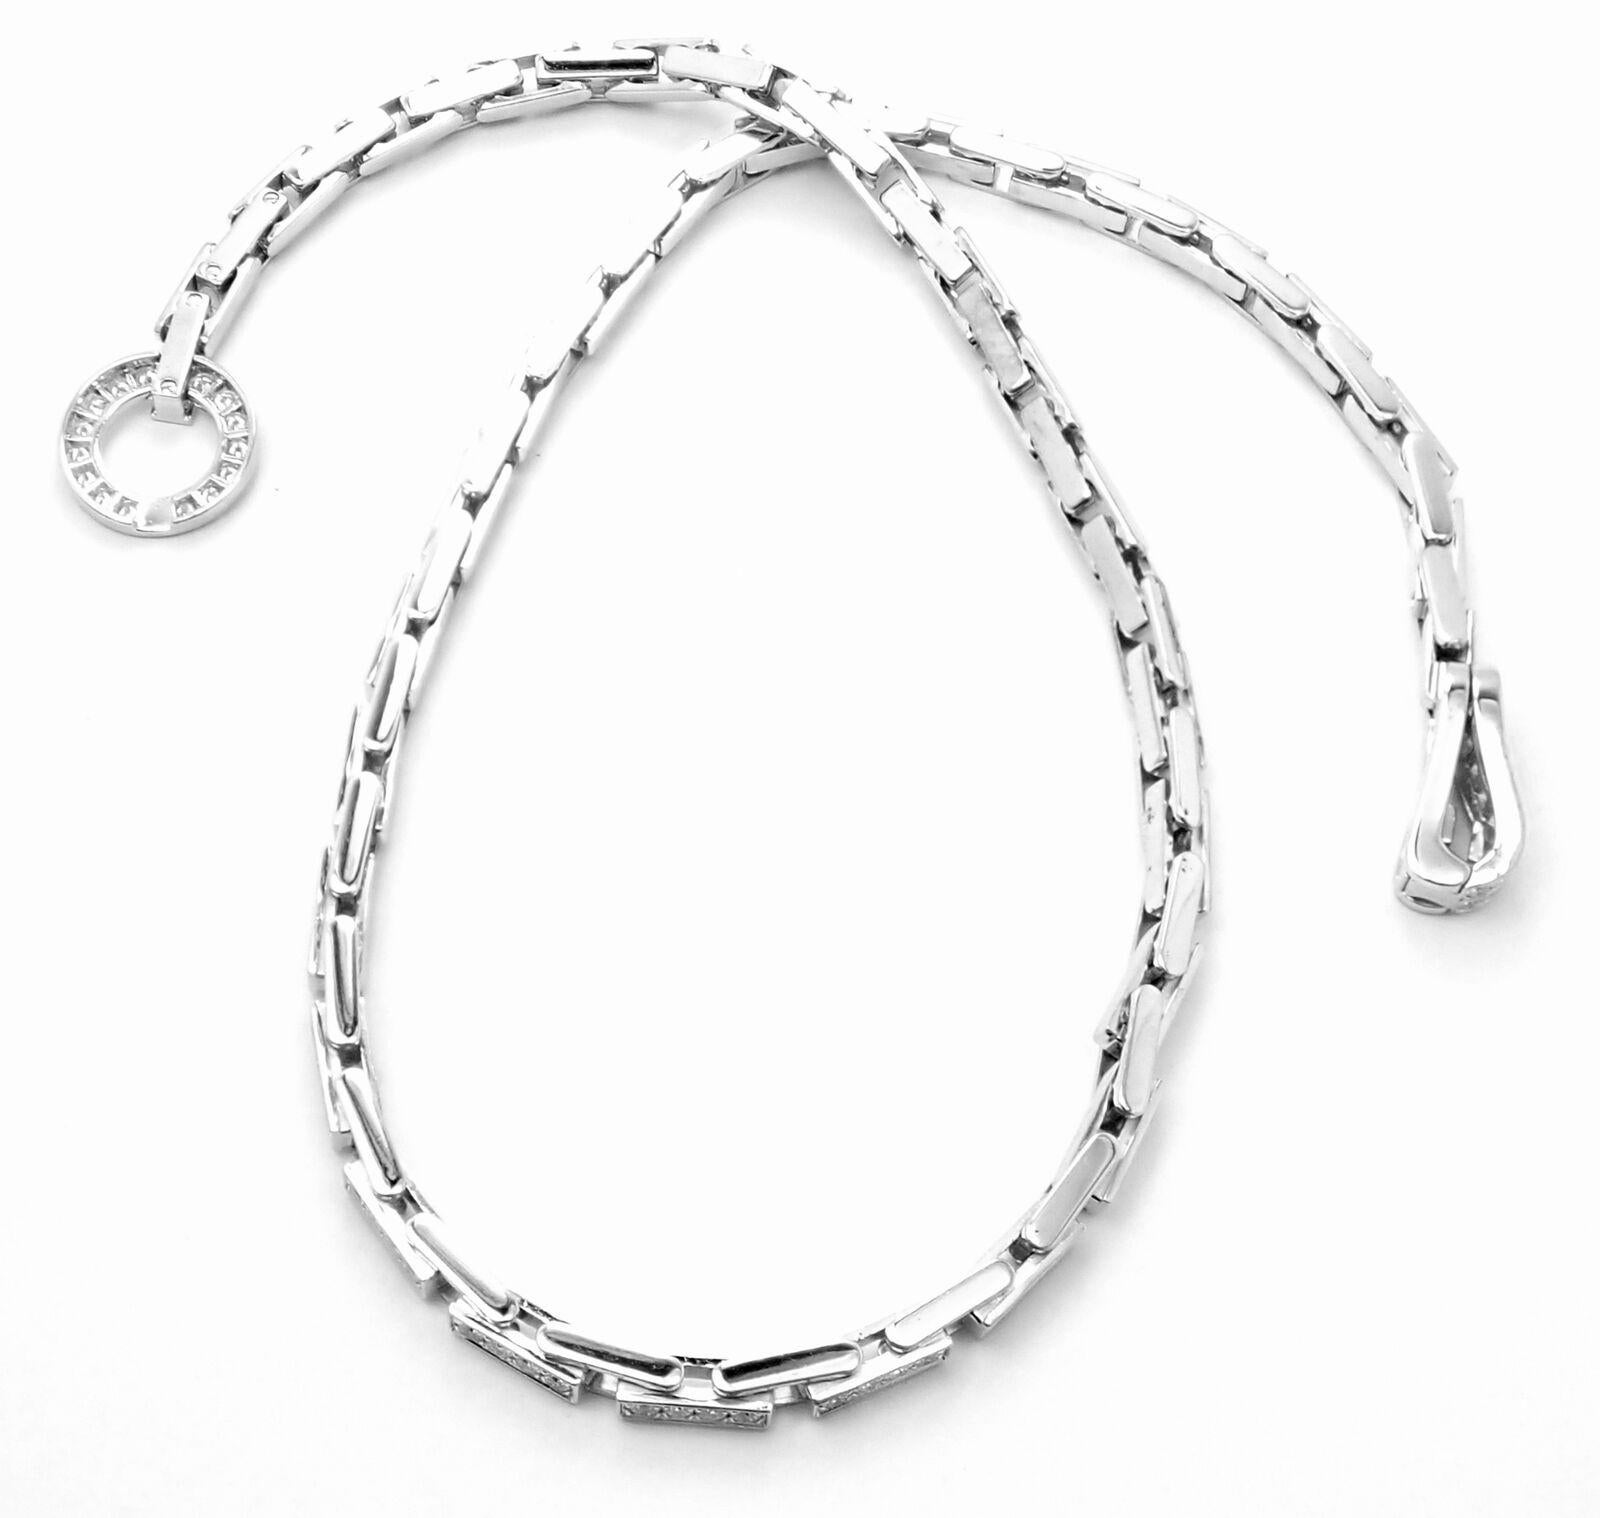 Cartier Agrafe Full Diamond Link White Gold Necklace Certificate For Sale 2